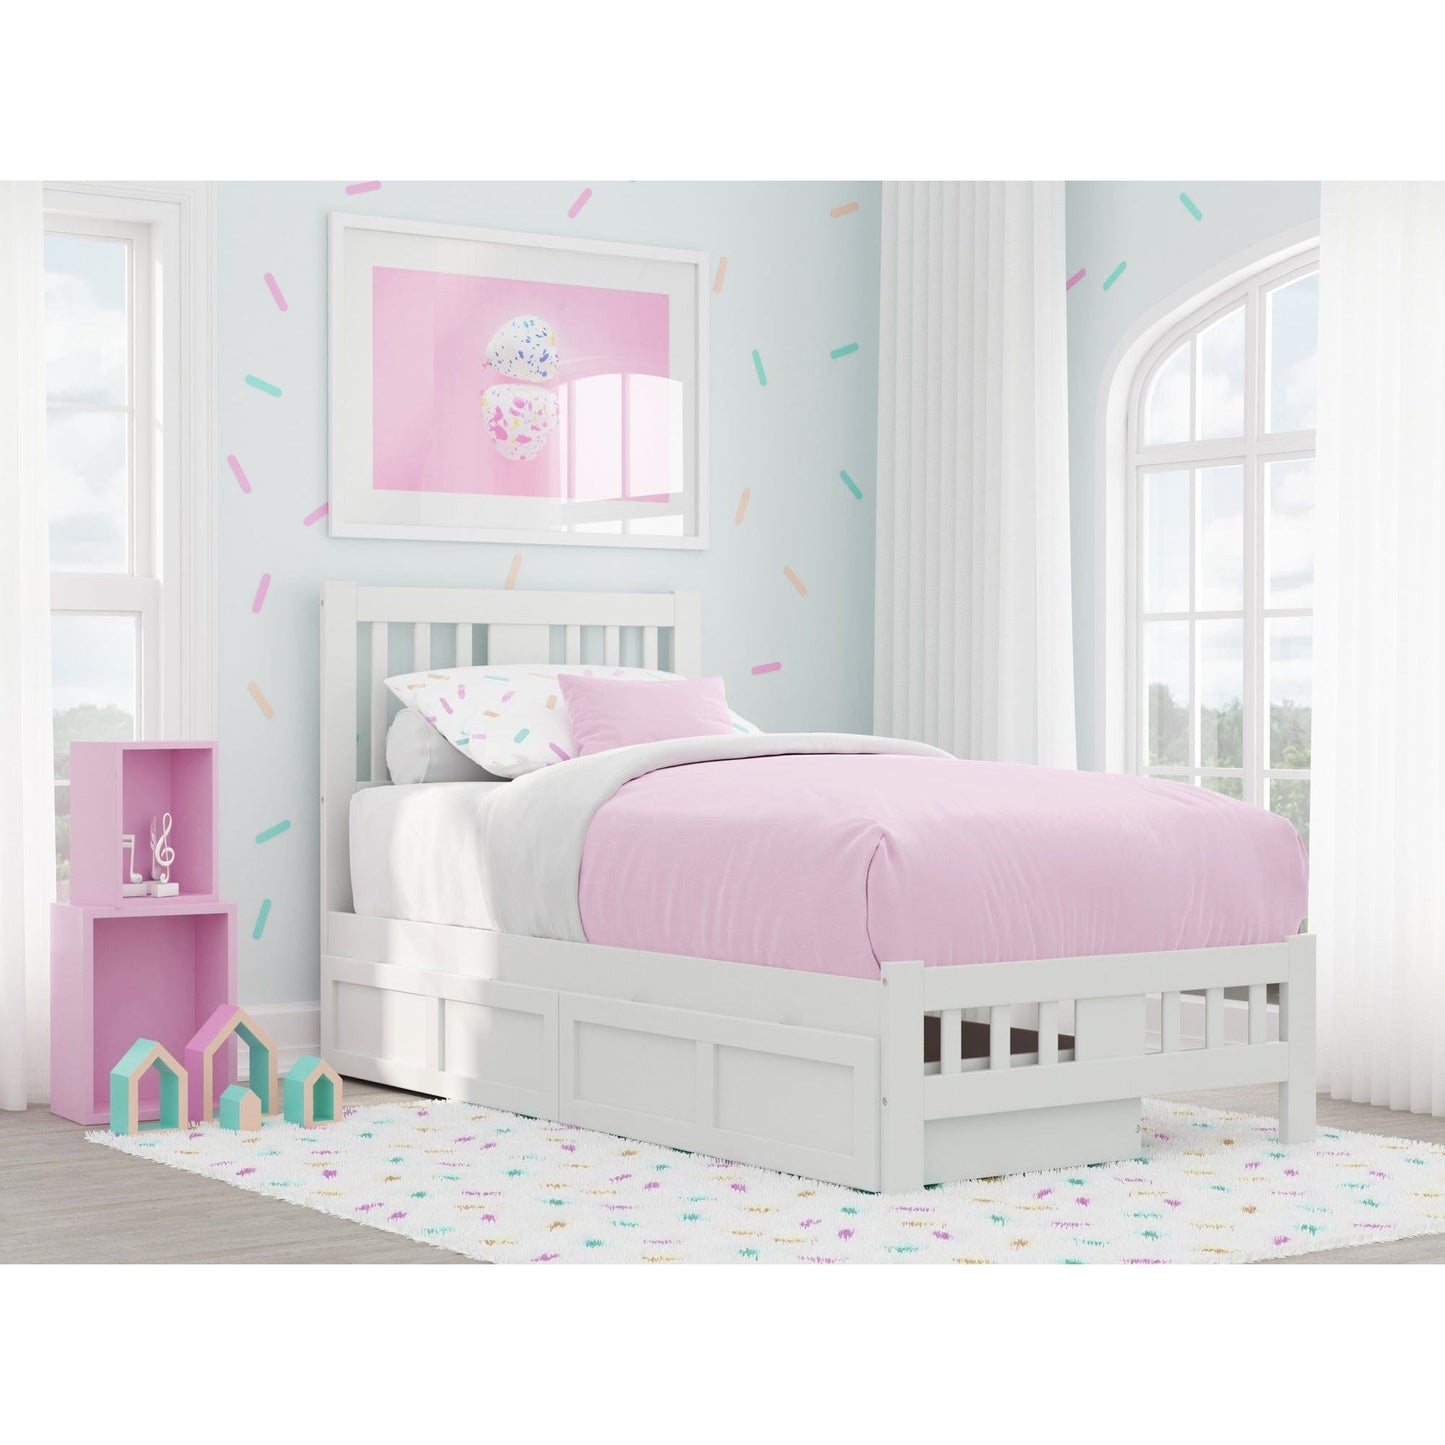 AFI Furnishings Tahoe Twin Bed with Footboard and 2 Drawers in White AG8963322